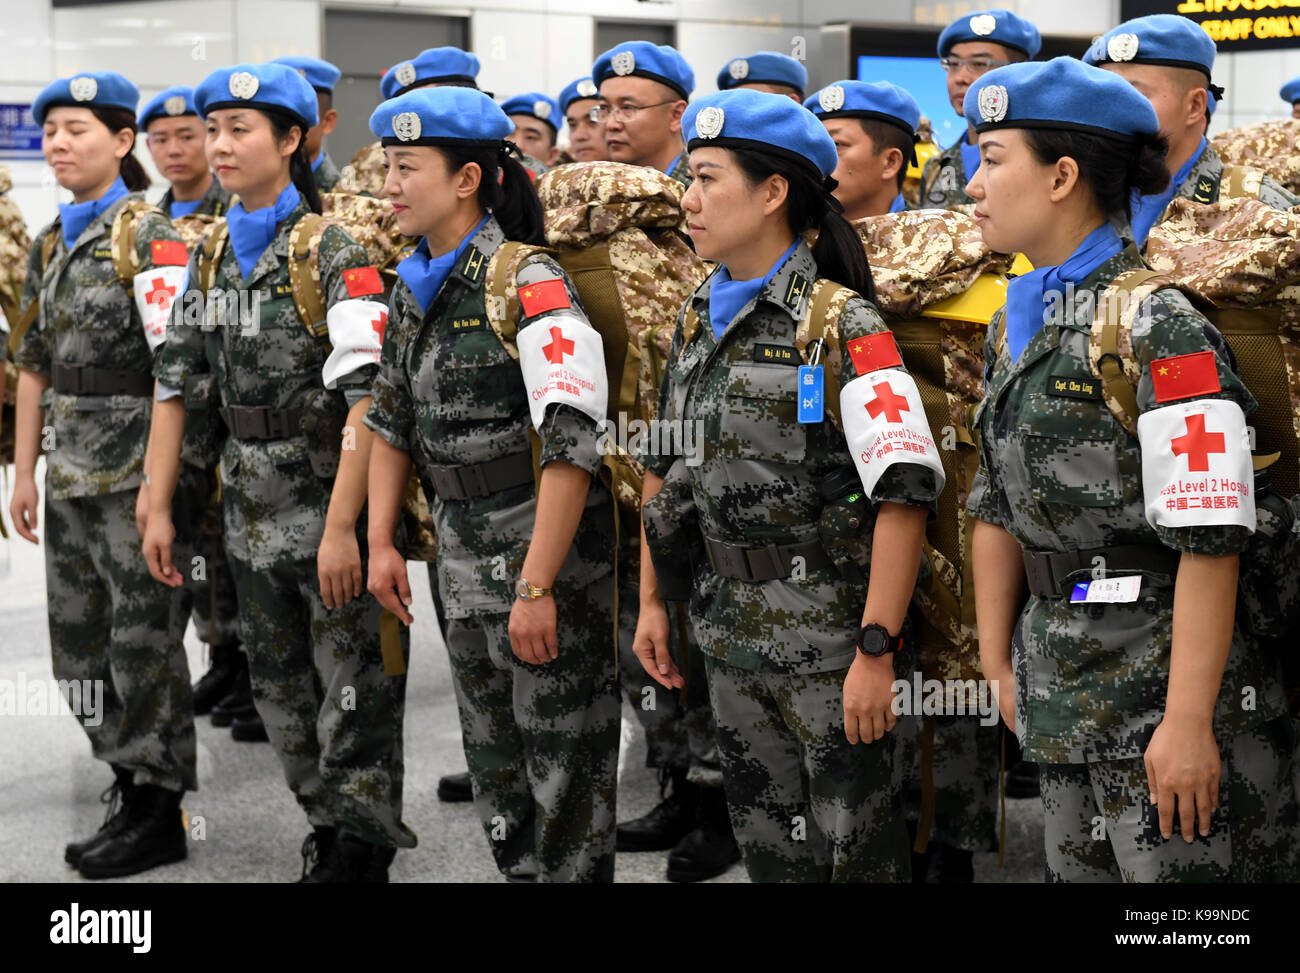 Zhengzhou, China's Henan Province. 21st Sep, 2017. Chinese female peacekeepers attend a ceremony before leaving for South Sudan from Zhengzhou, capital of central China's Henan Province, Sept. 21, 2017. The 105-member squad of Chinese peacekeepers left for Wau in South Sudan on a one-year peacekeeping mission. Credit: Zhu Xiang/Xinhua/Alamy Live News Stock Photo